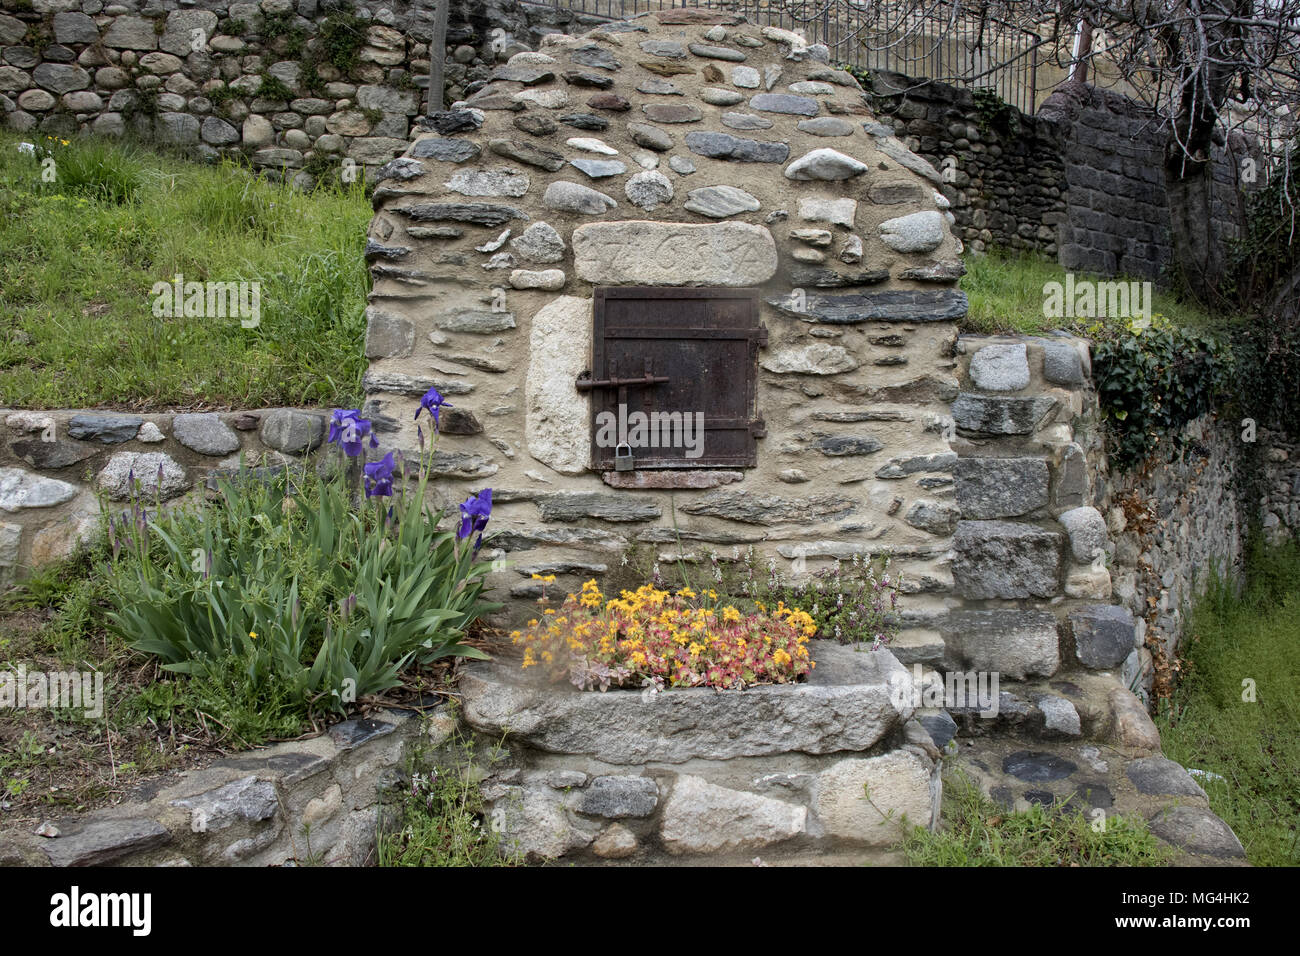 Old stone french oven in the village of Catllar, near Prades, with sedum and irises, Languedoc-Roussillon, Pyrénées-Orientales, France. Stock Photo